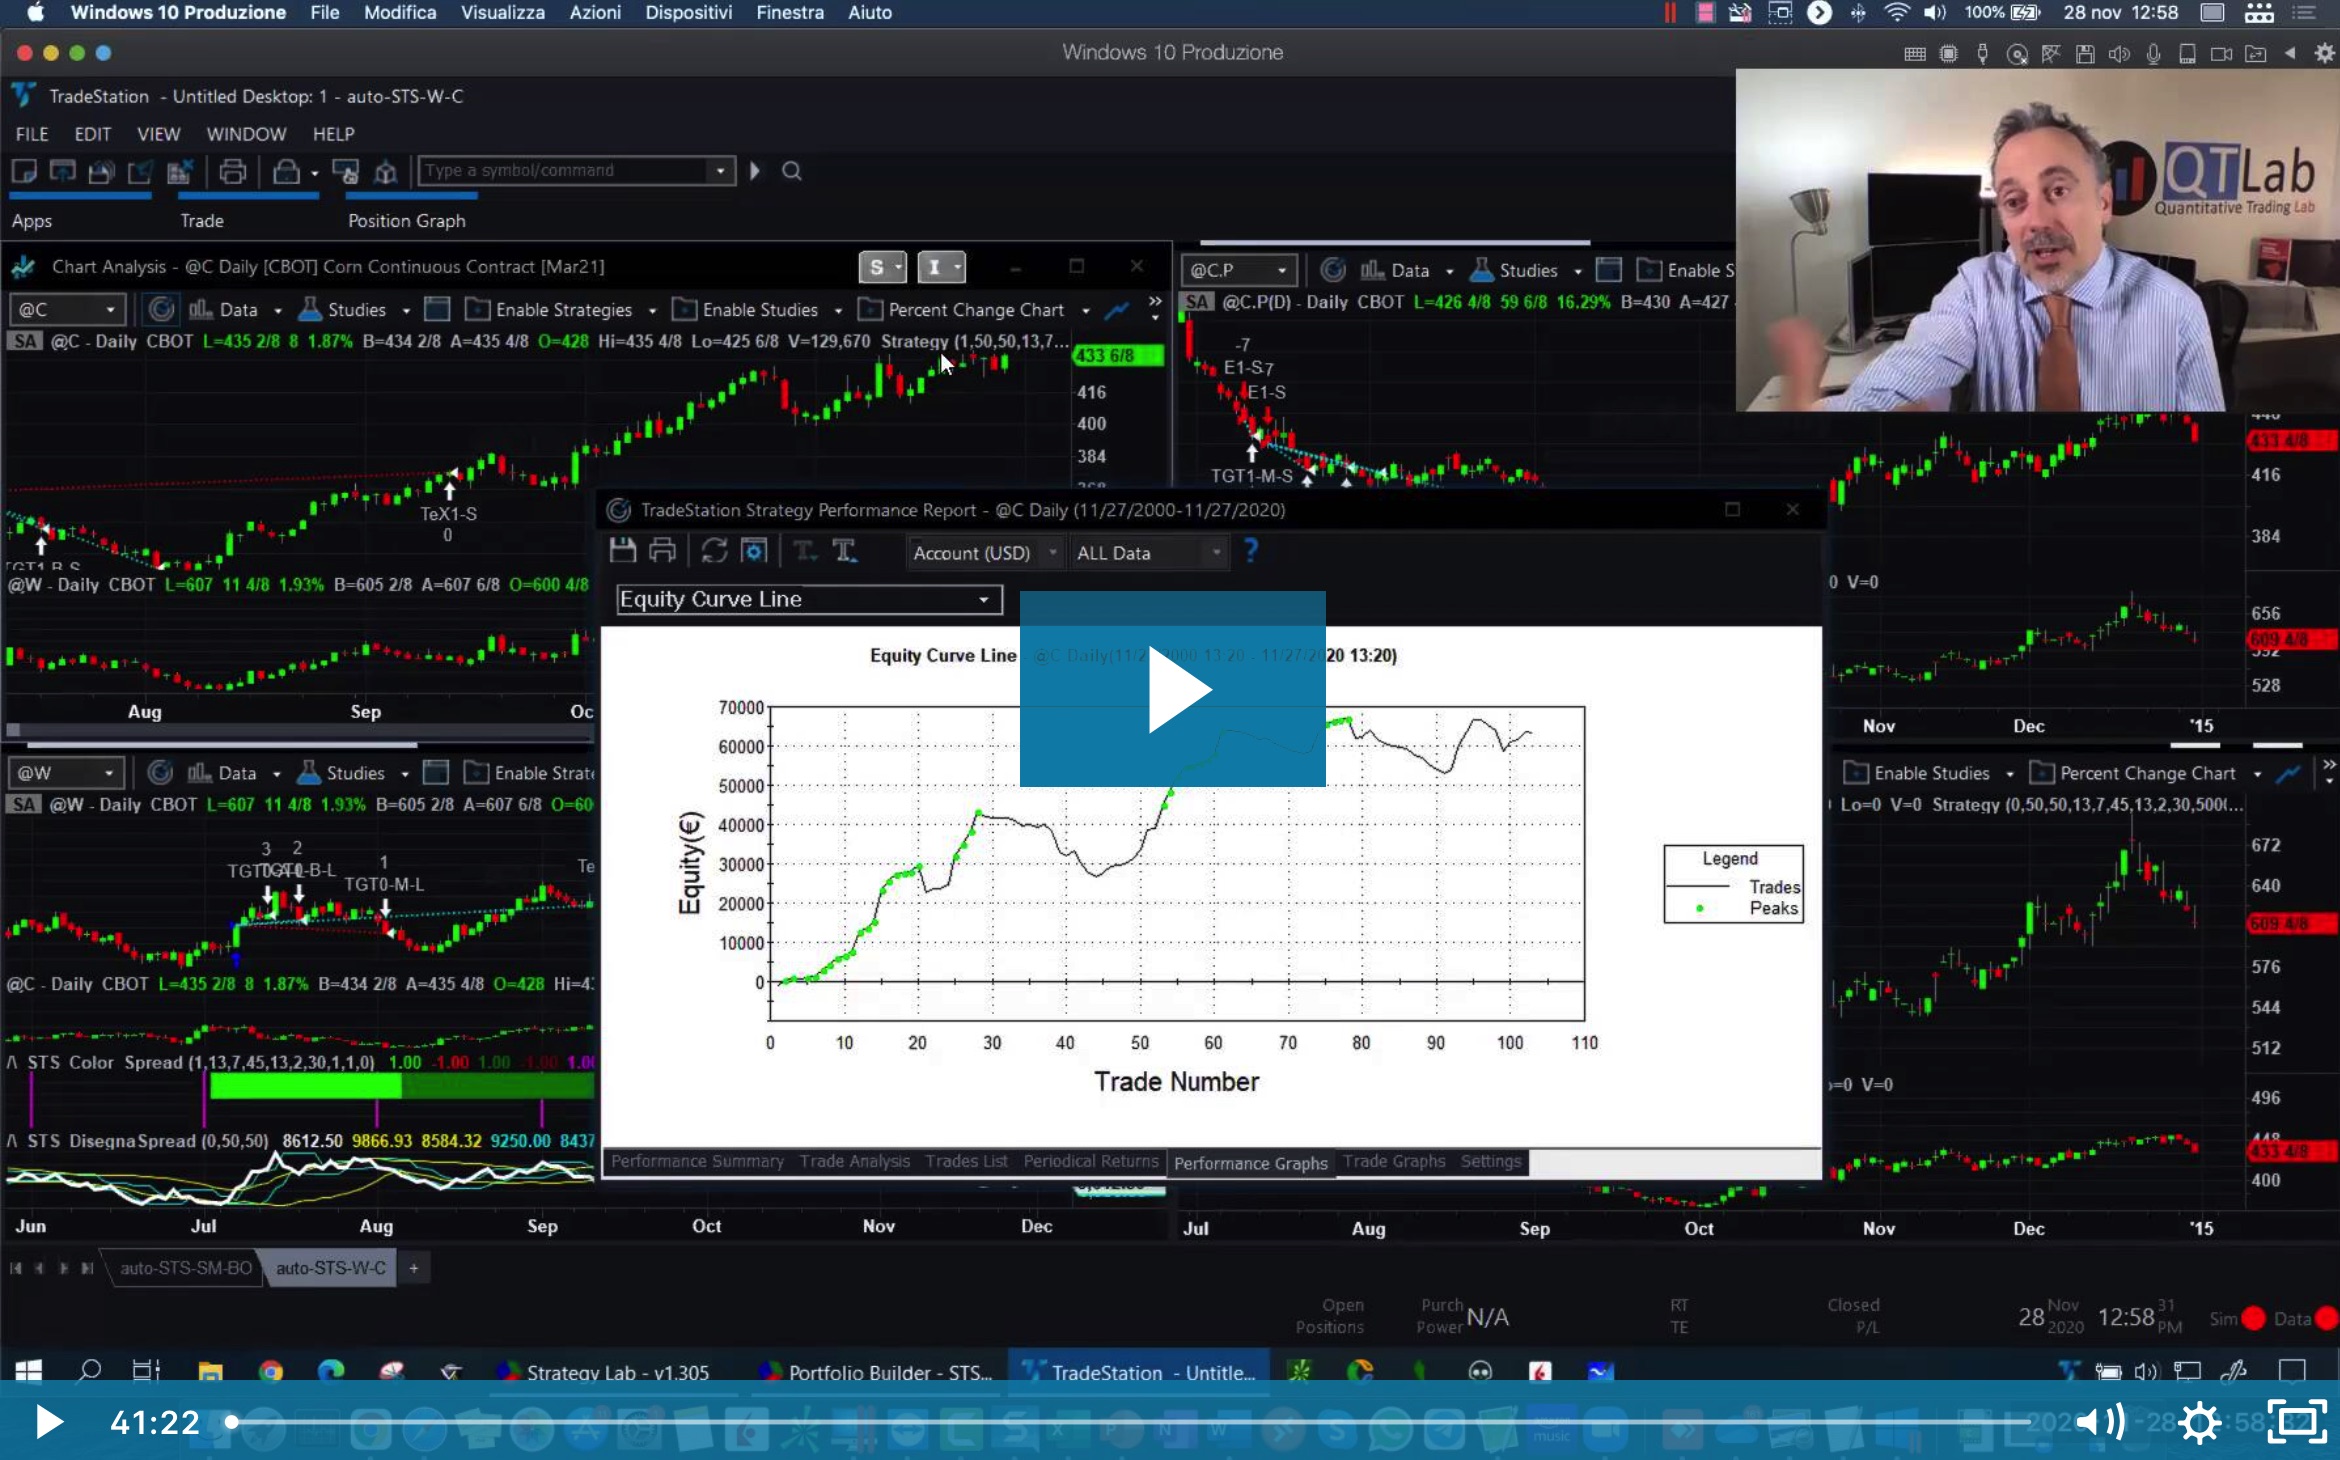 webinar commodity trading academy, corso commodity spread trading, futures commodity, etf commodities futures, cfd commodities, opzioni materie prime, trading materie prime,